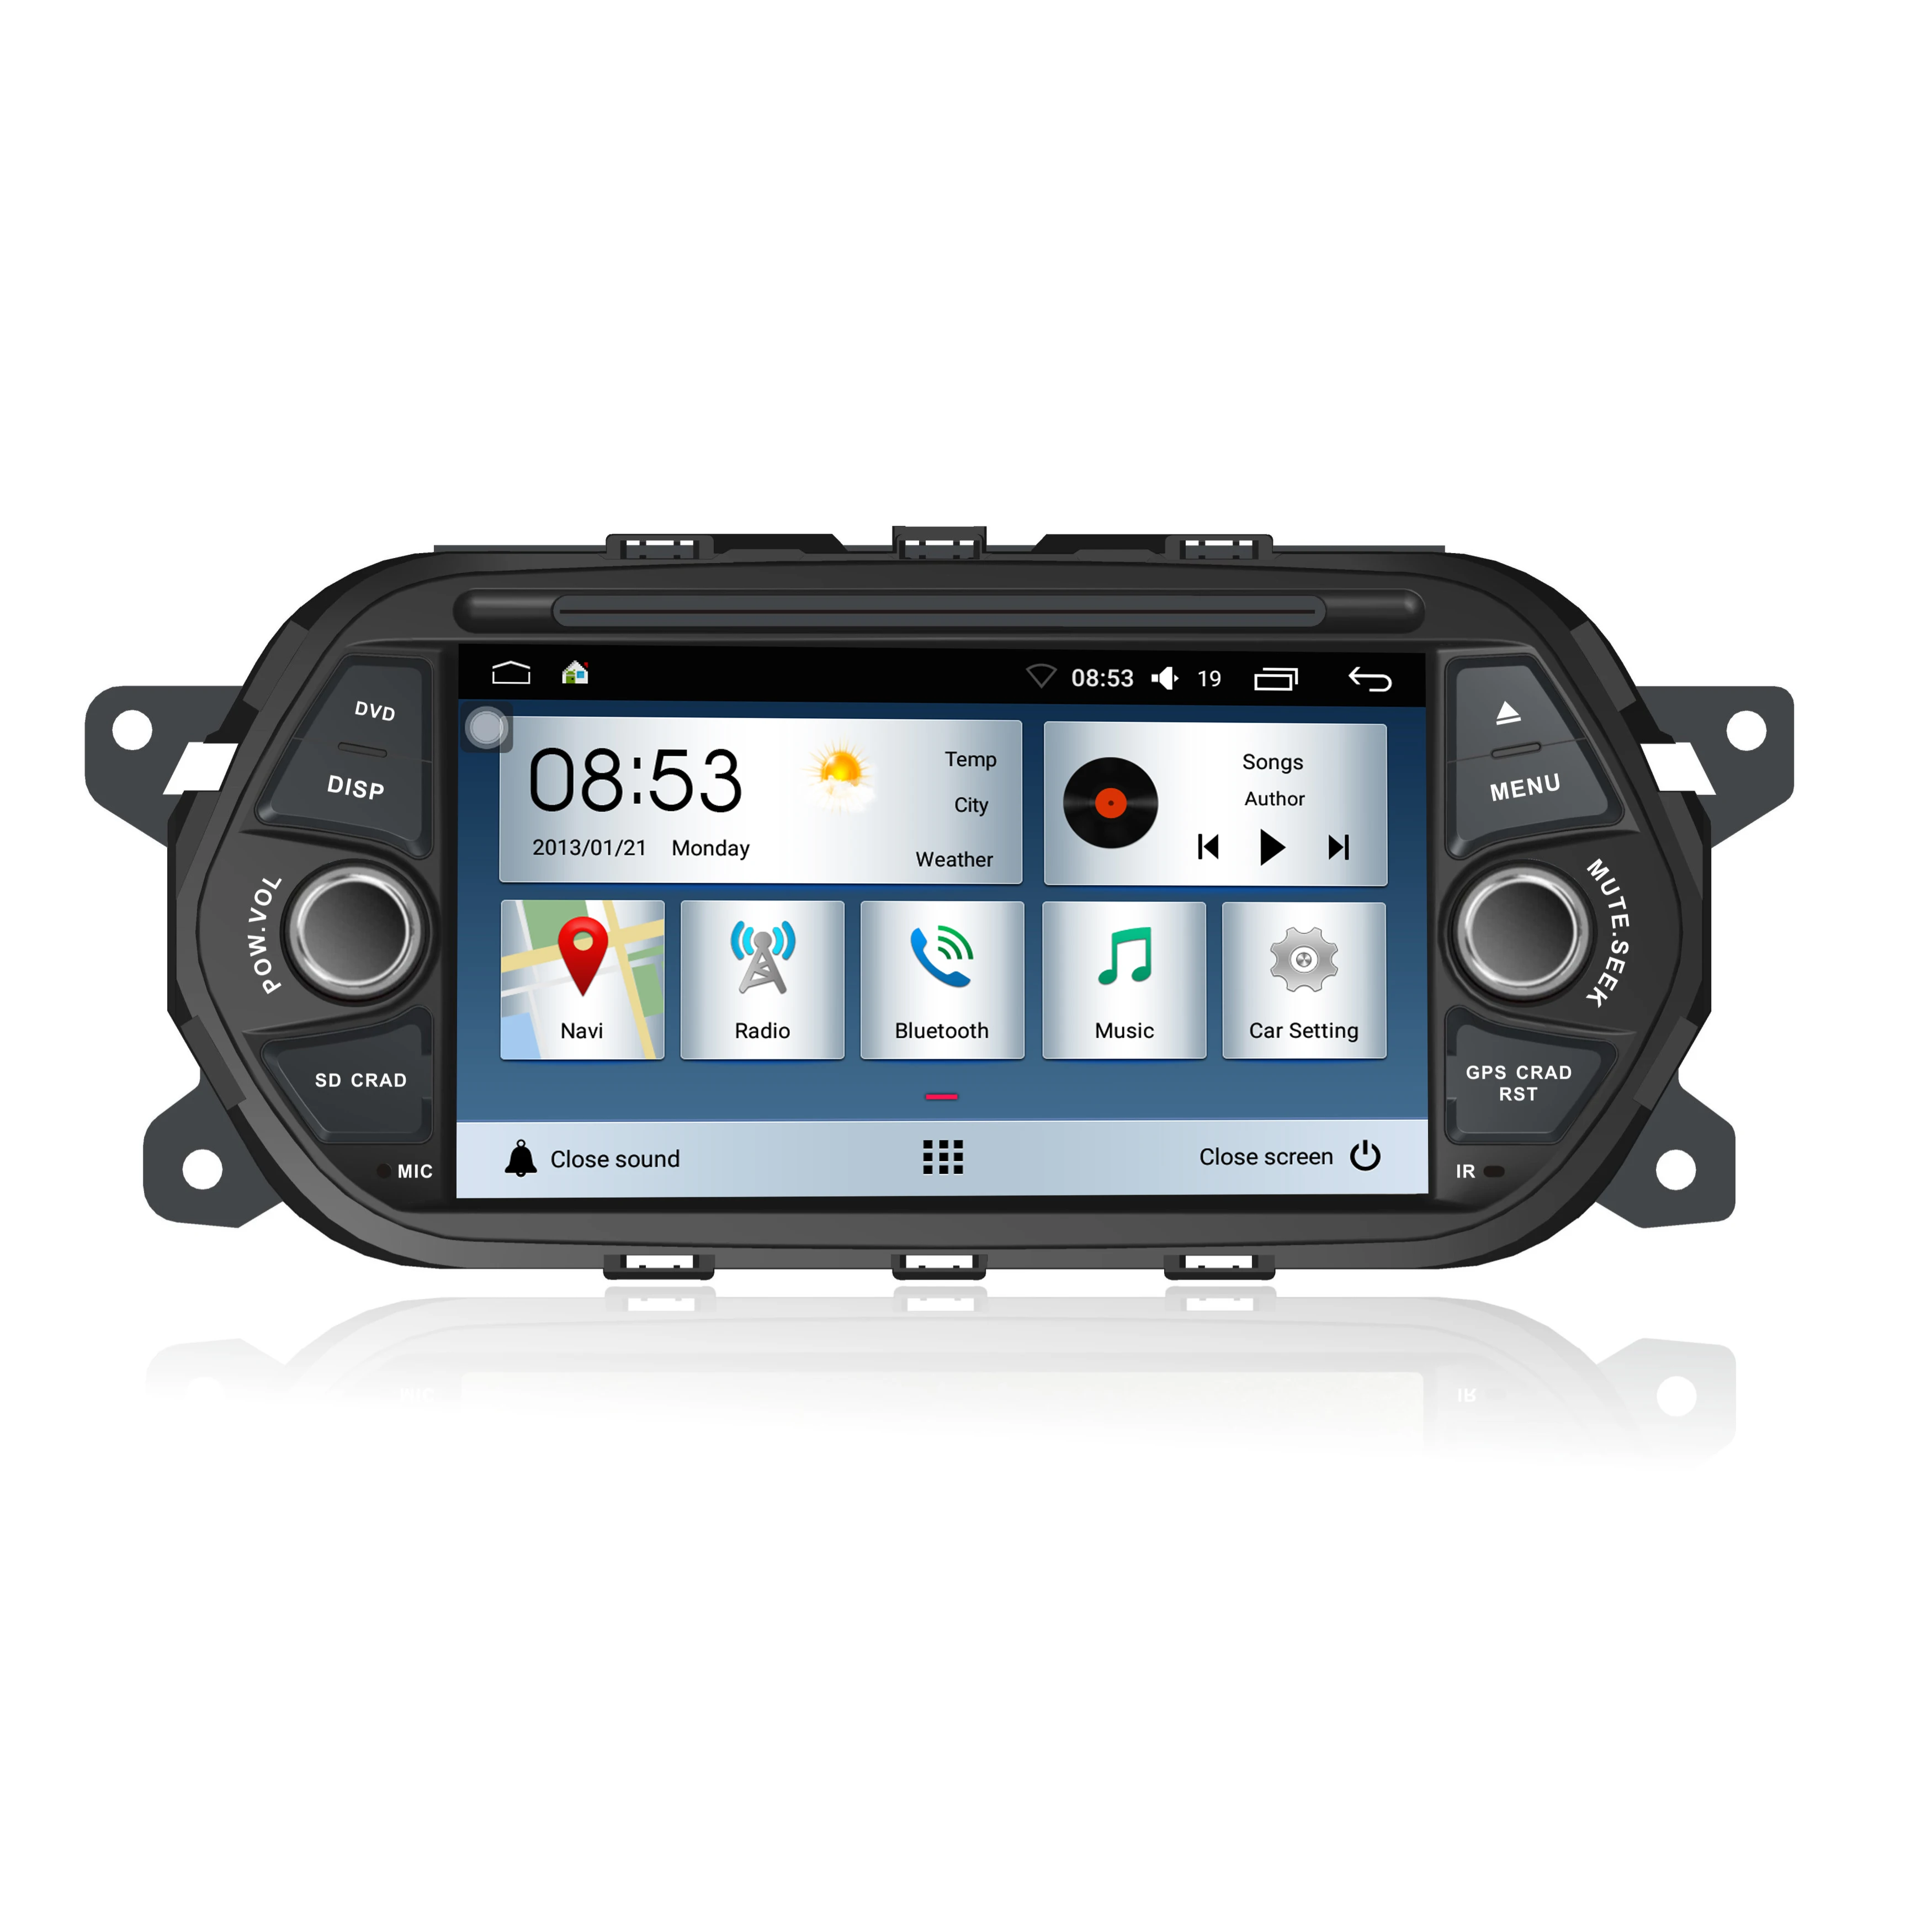 Android Car Radio Stereo For Fiat Tipo Egea 2015-2017 7